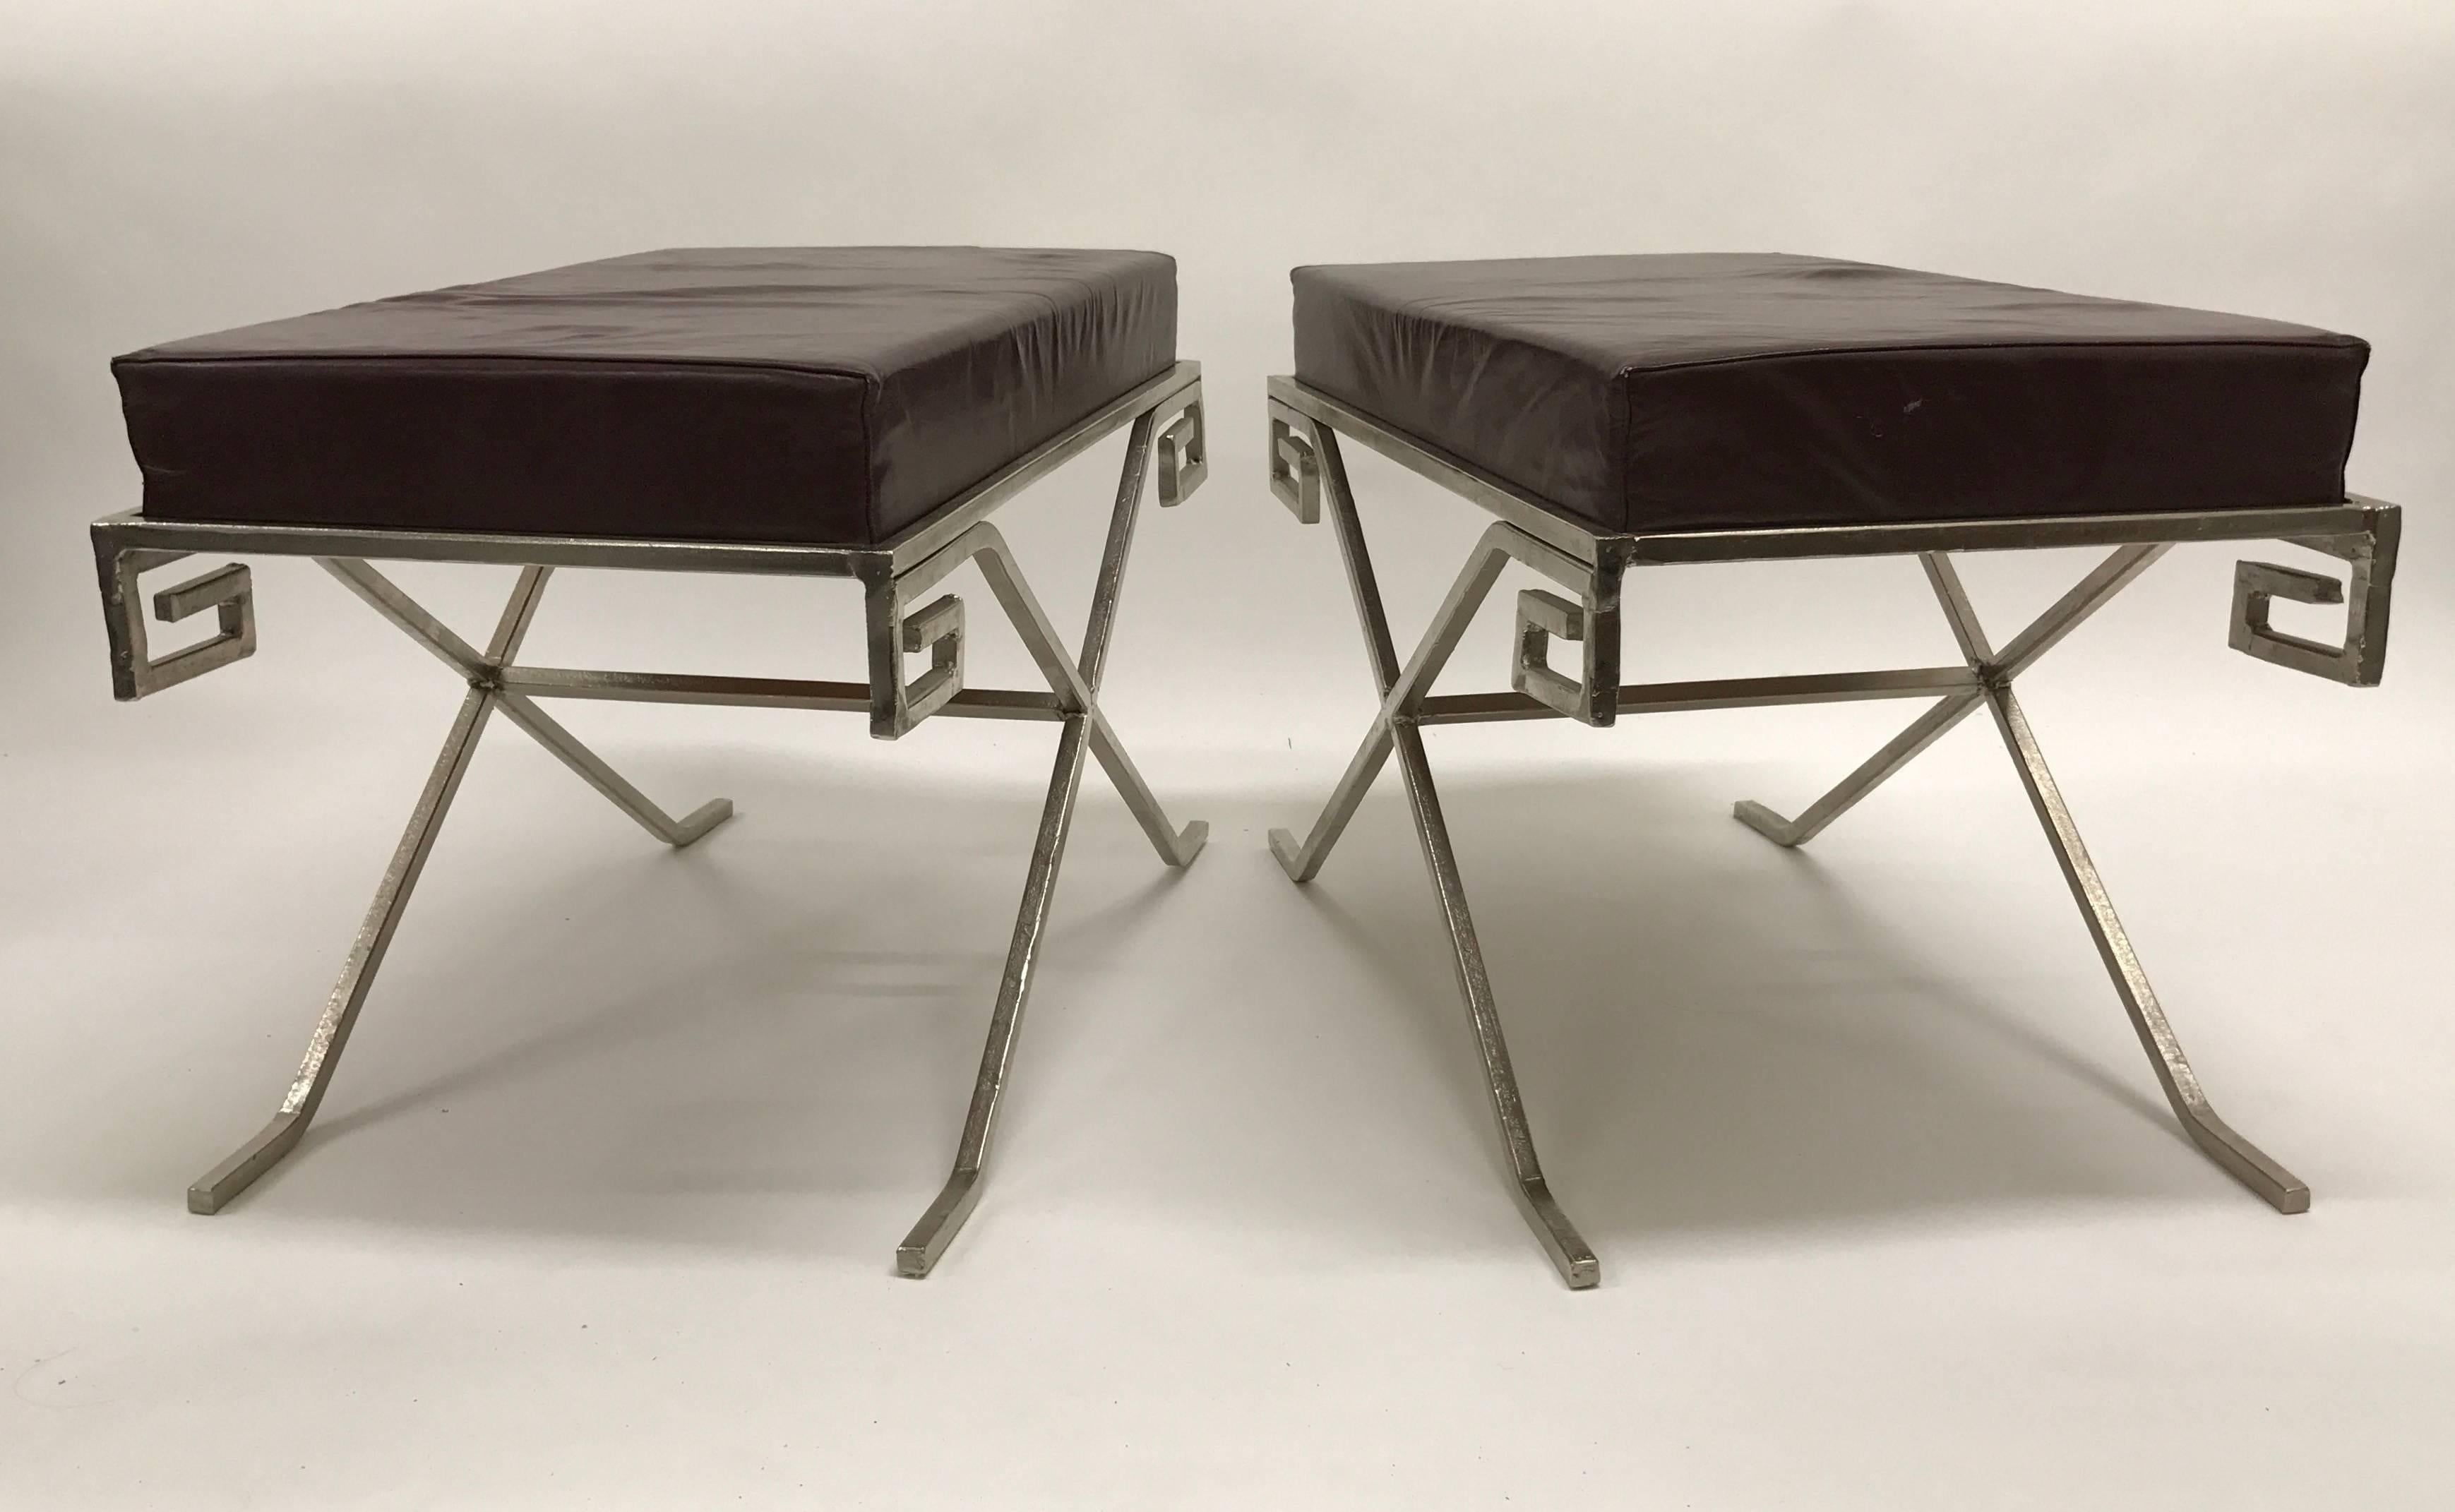 Pair of Modern Greek Key Neoclassical Benches after Jean Michel Frank For Sale 3